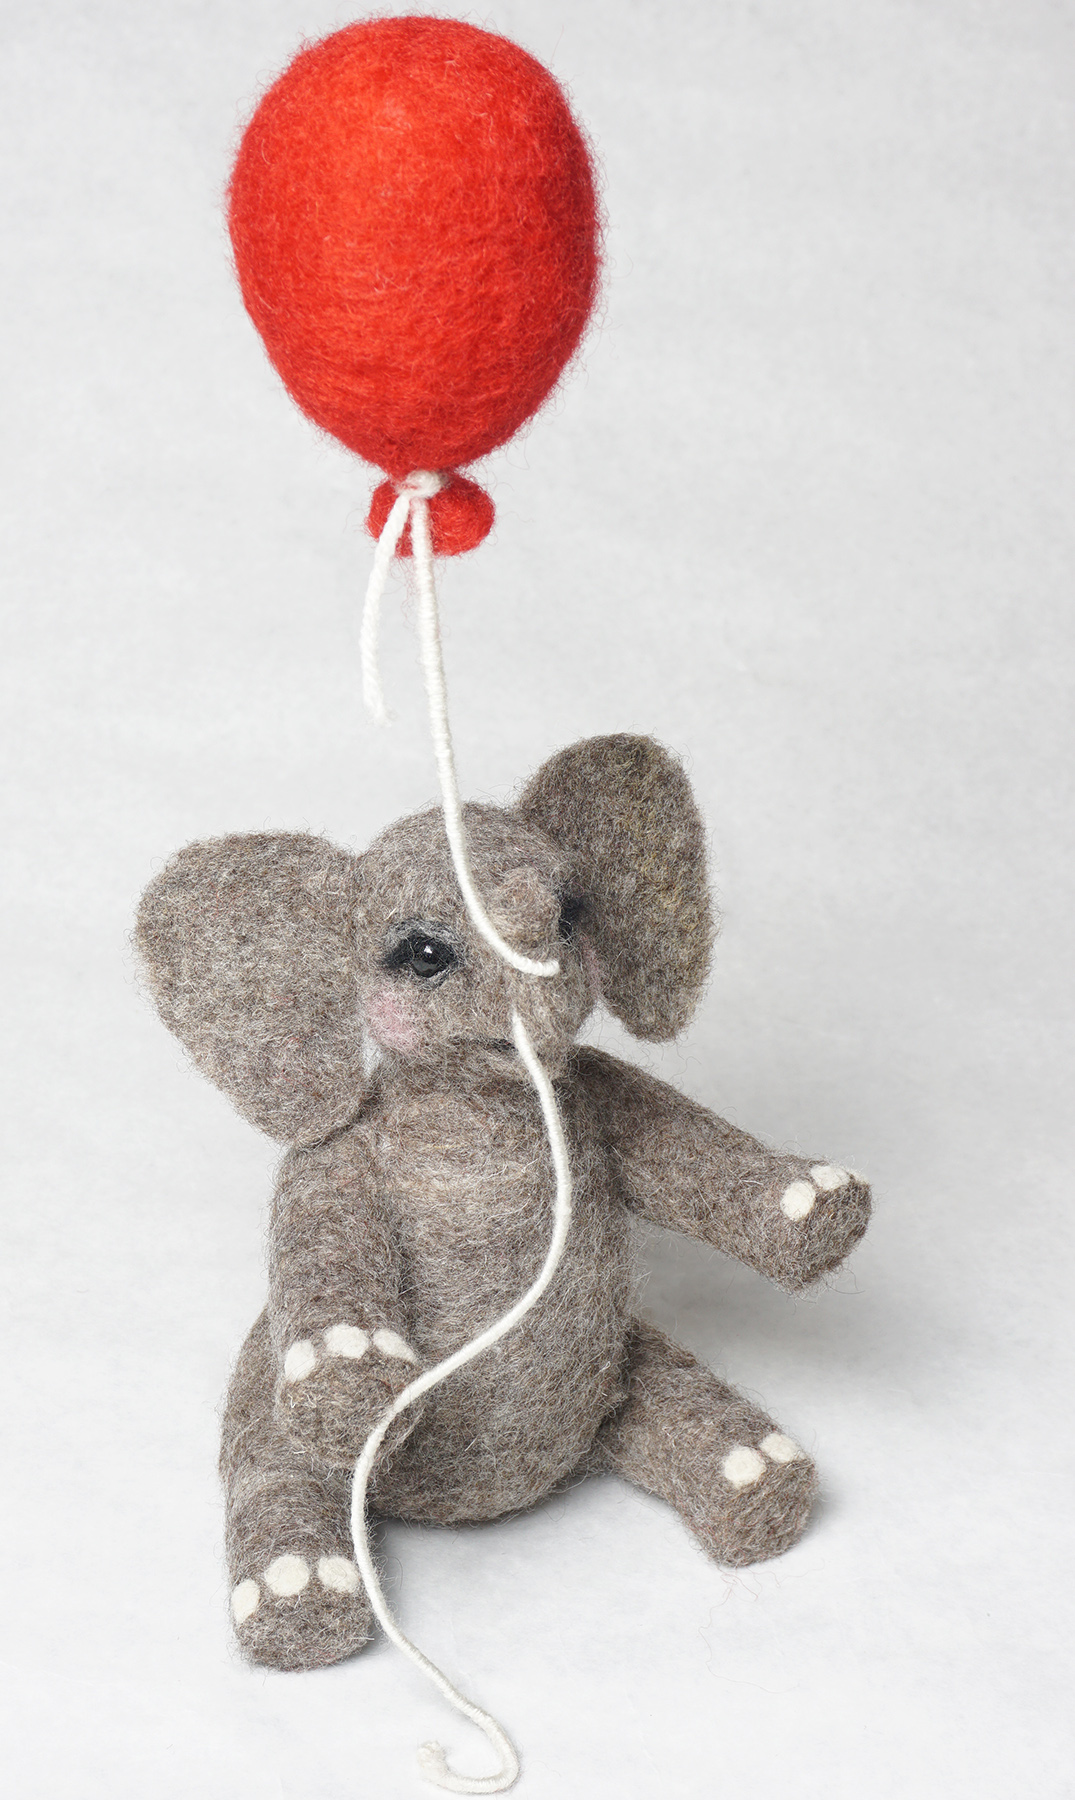 Looking Up, anthropomorphic elephant sculpture art doll, needle felted wool